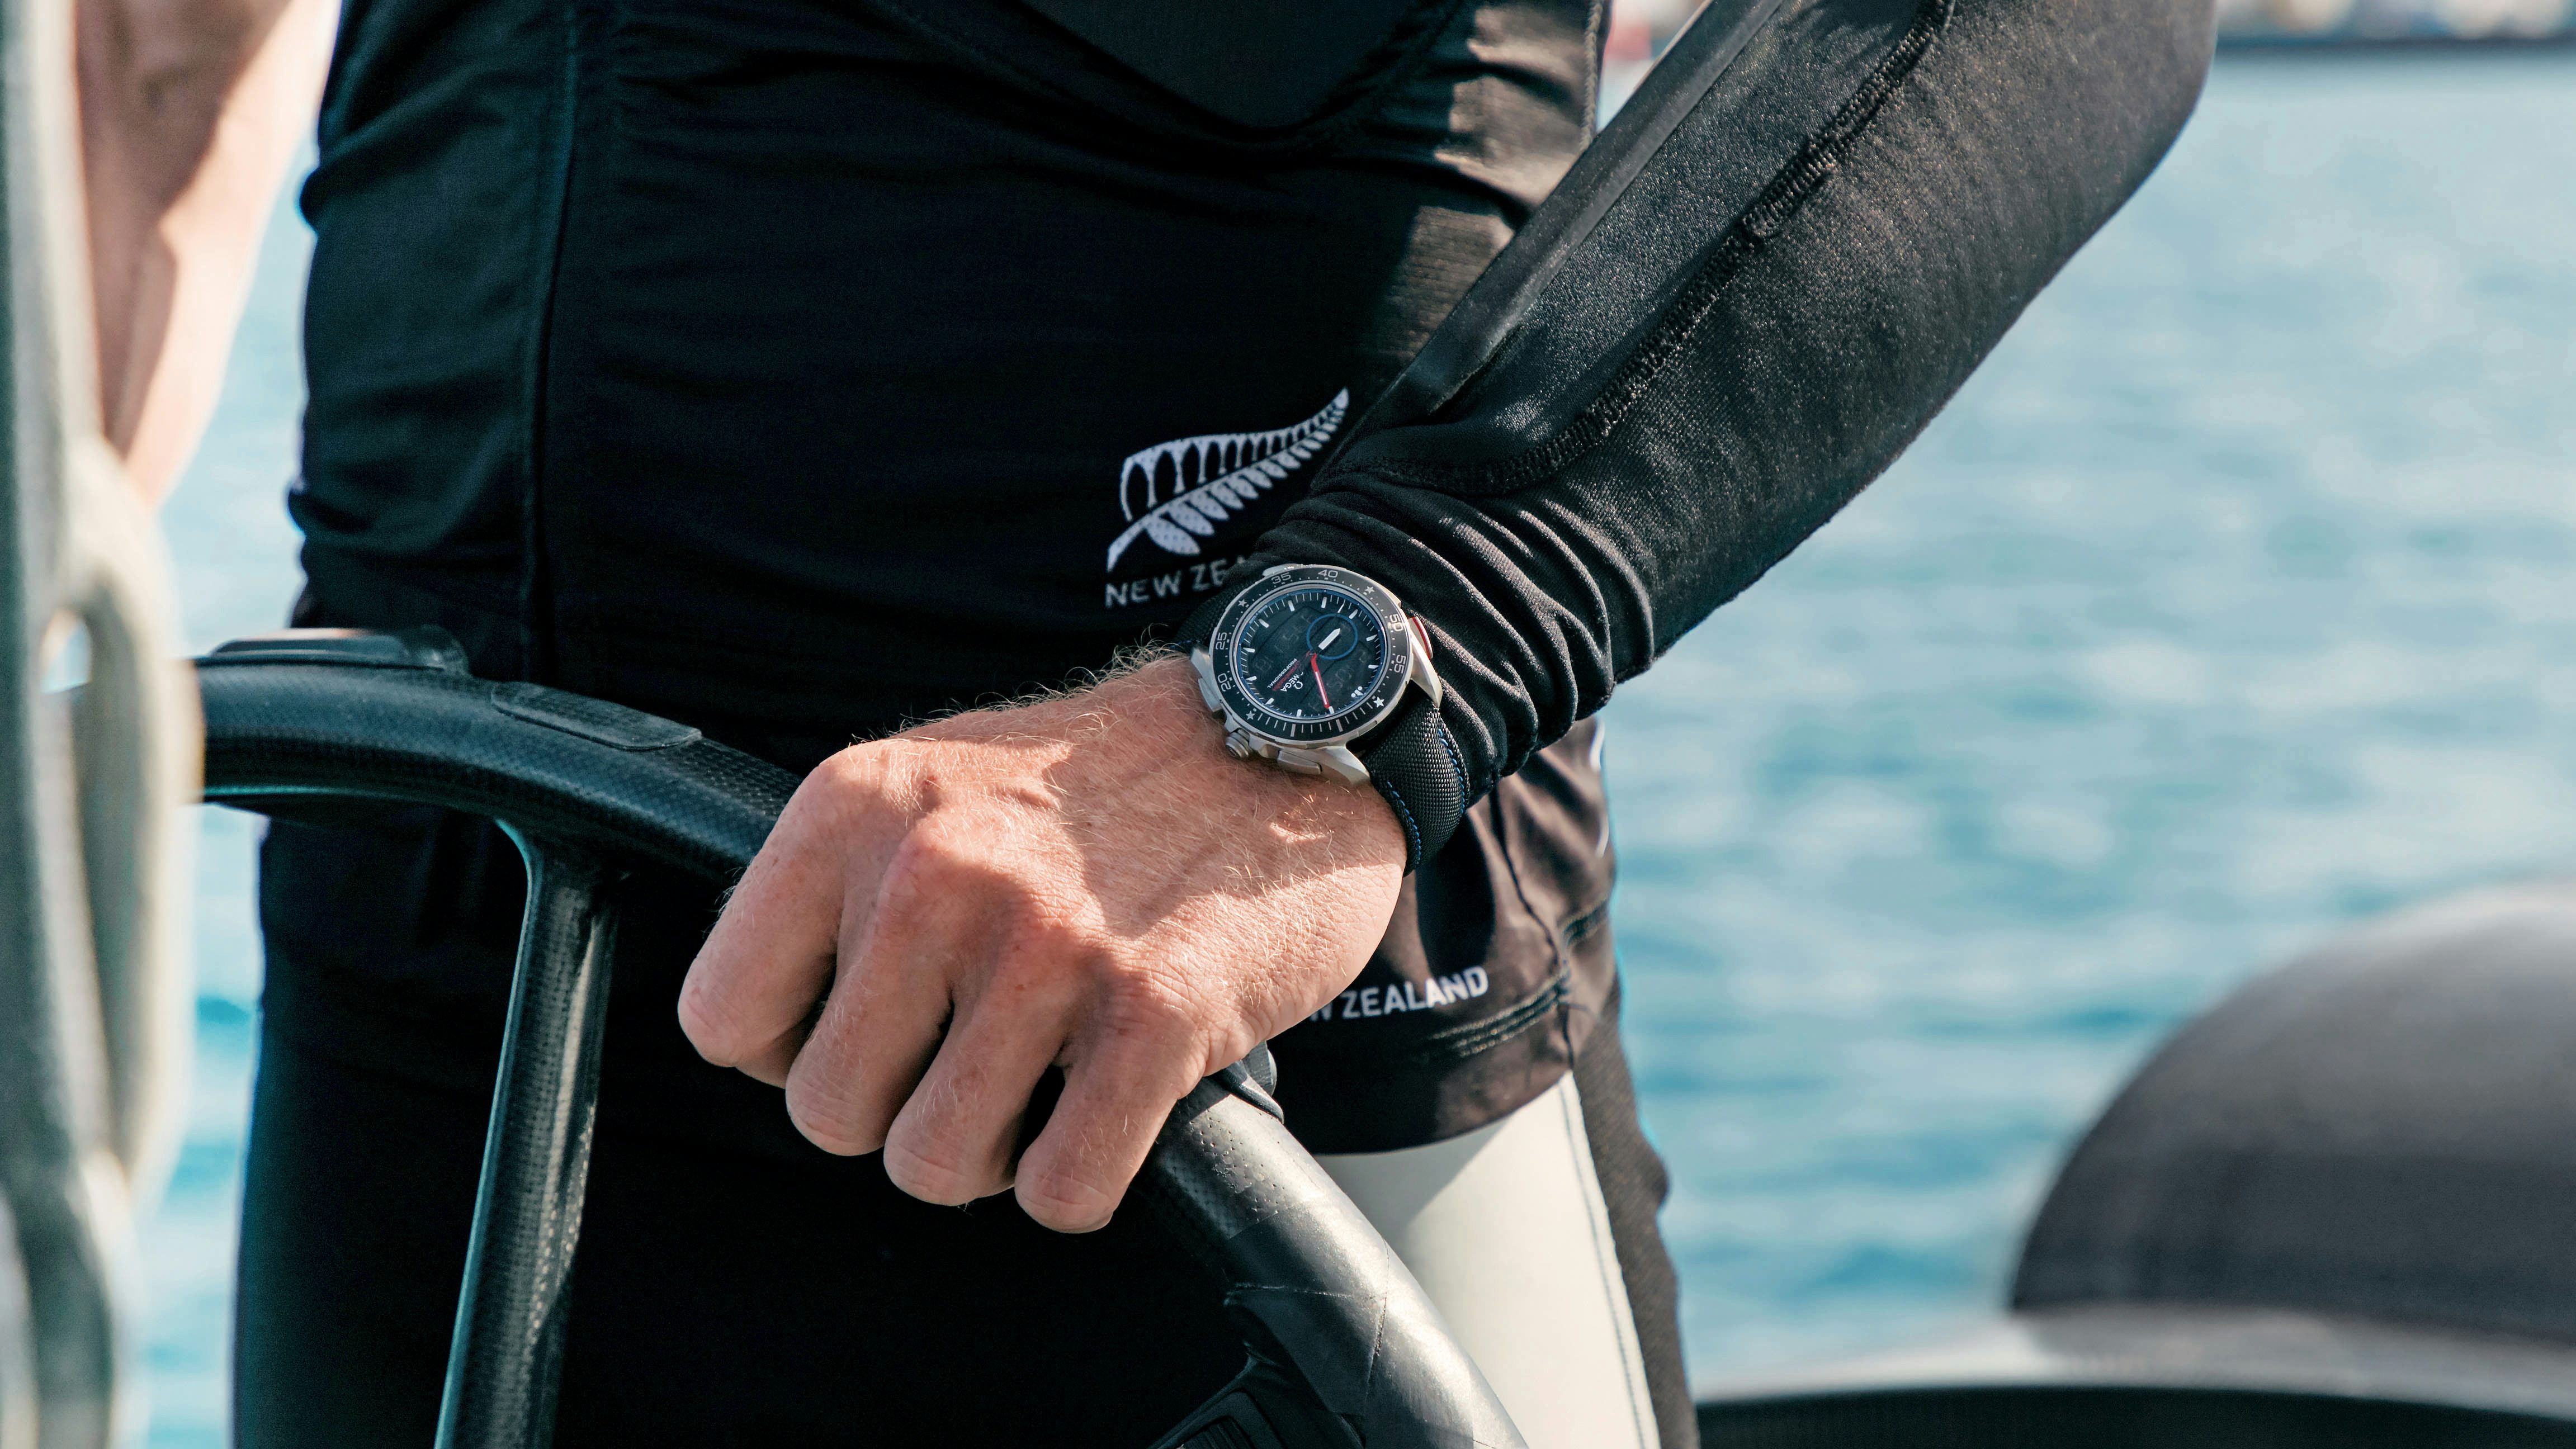 The America's Cup Seamaster Pro 300M Racing Chronograph - A Complicated  Regatta Timer